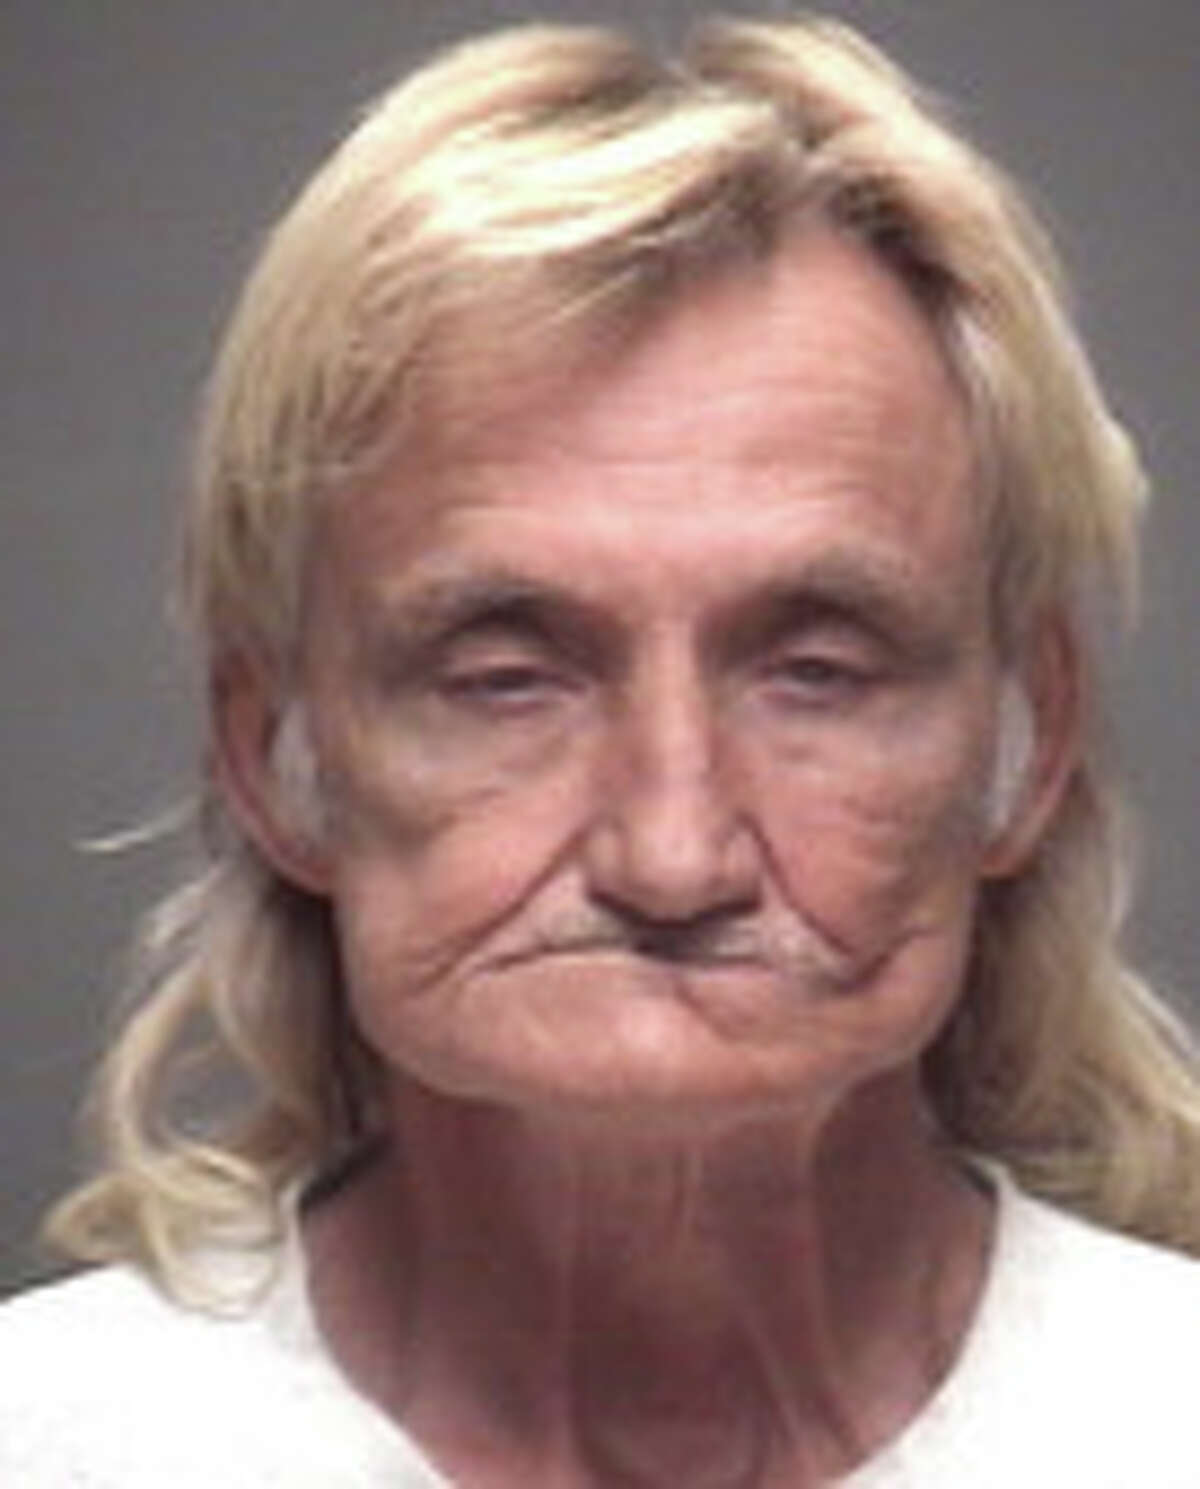 Clyde Edwin Hedrick, 60, of San Leon, is on trial on a murder charge in the 1984 death of Ellen Rae Beason. Photo: Galveston County Sheriff's Office